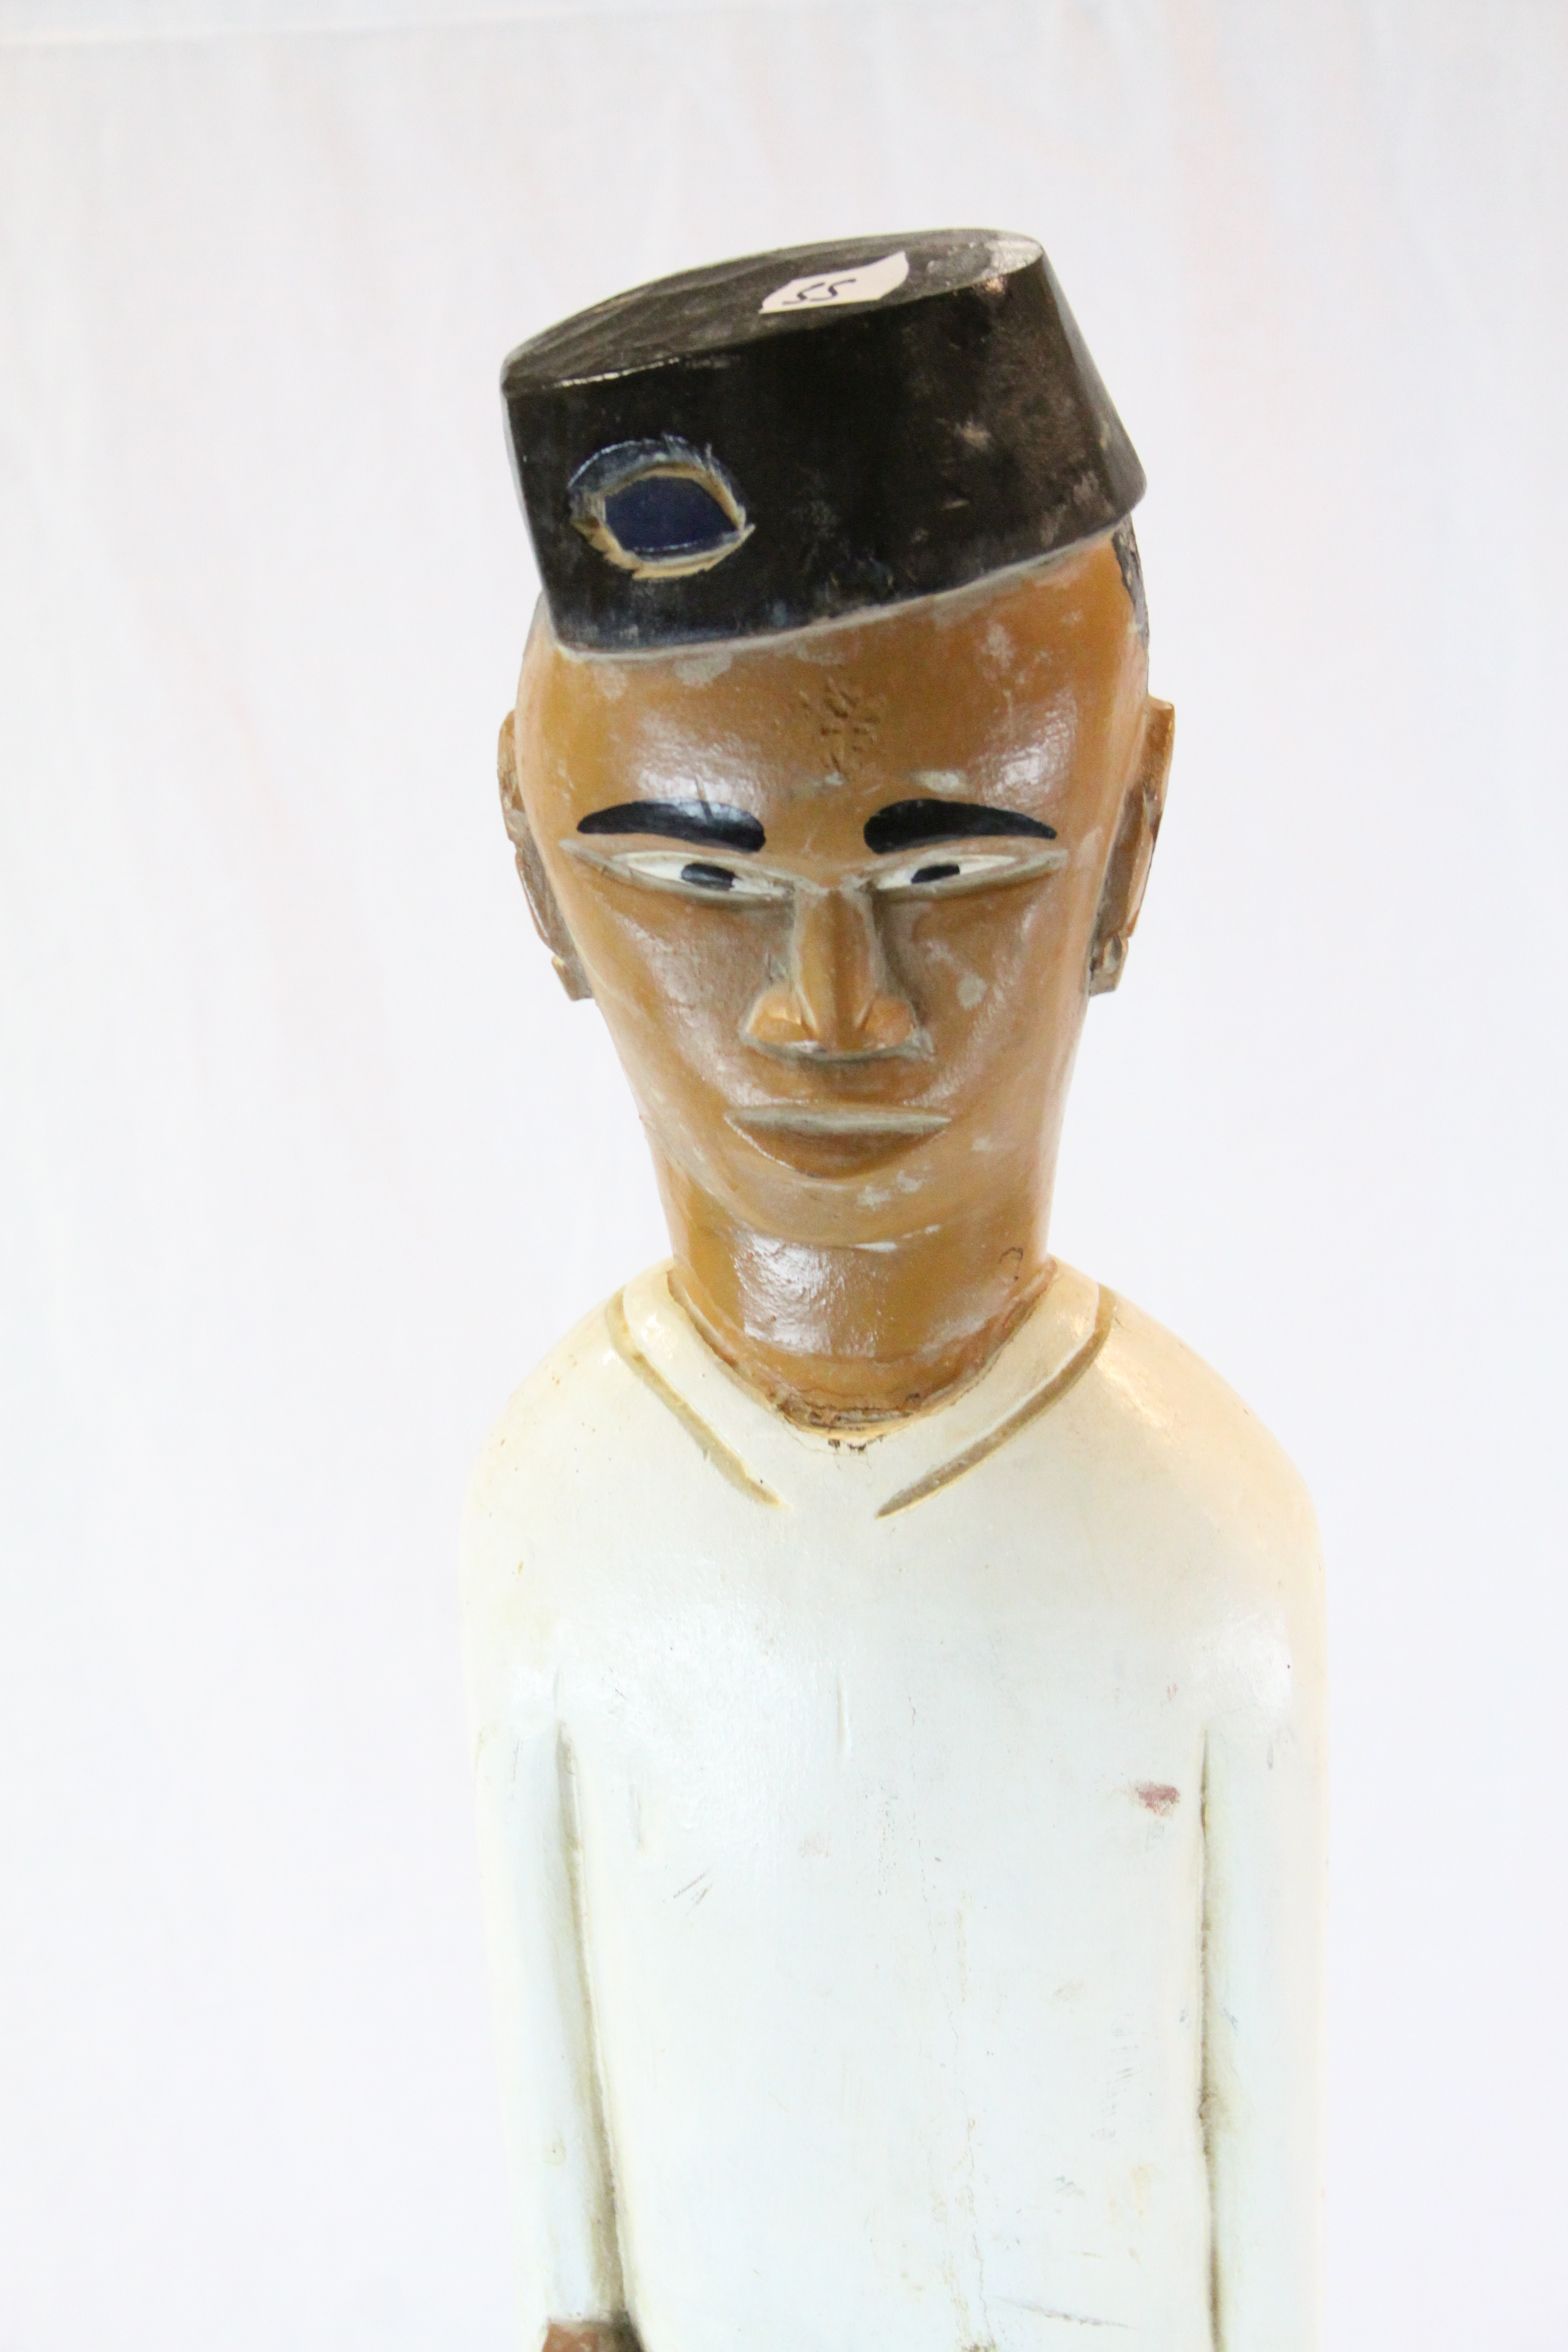 Carved Wooden Colonial figure with plaque to base reading "Gurkha Rifles c.1914" with hand painted - Image 2 of 5